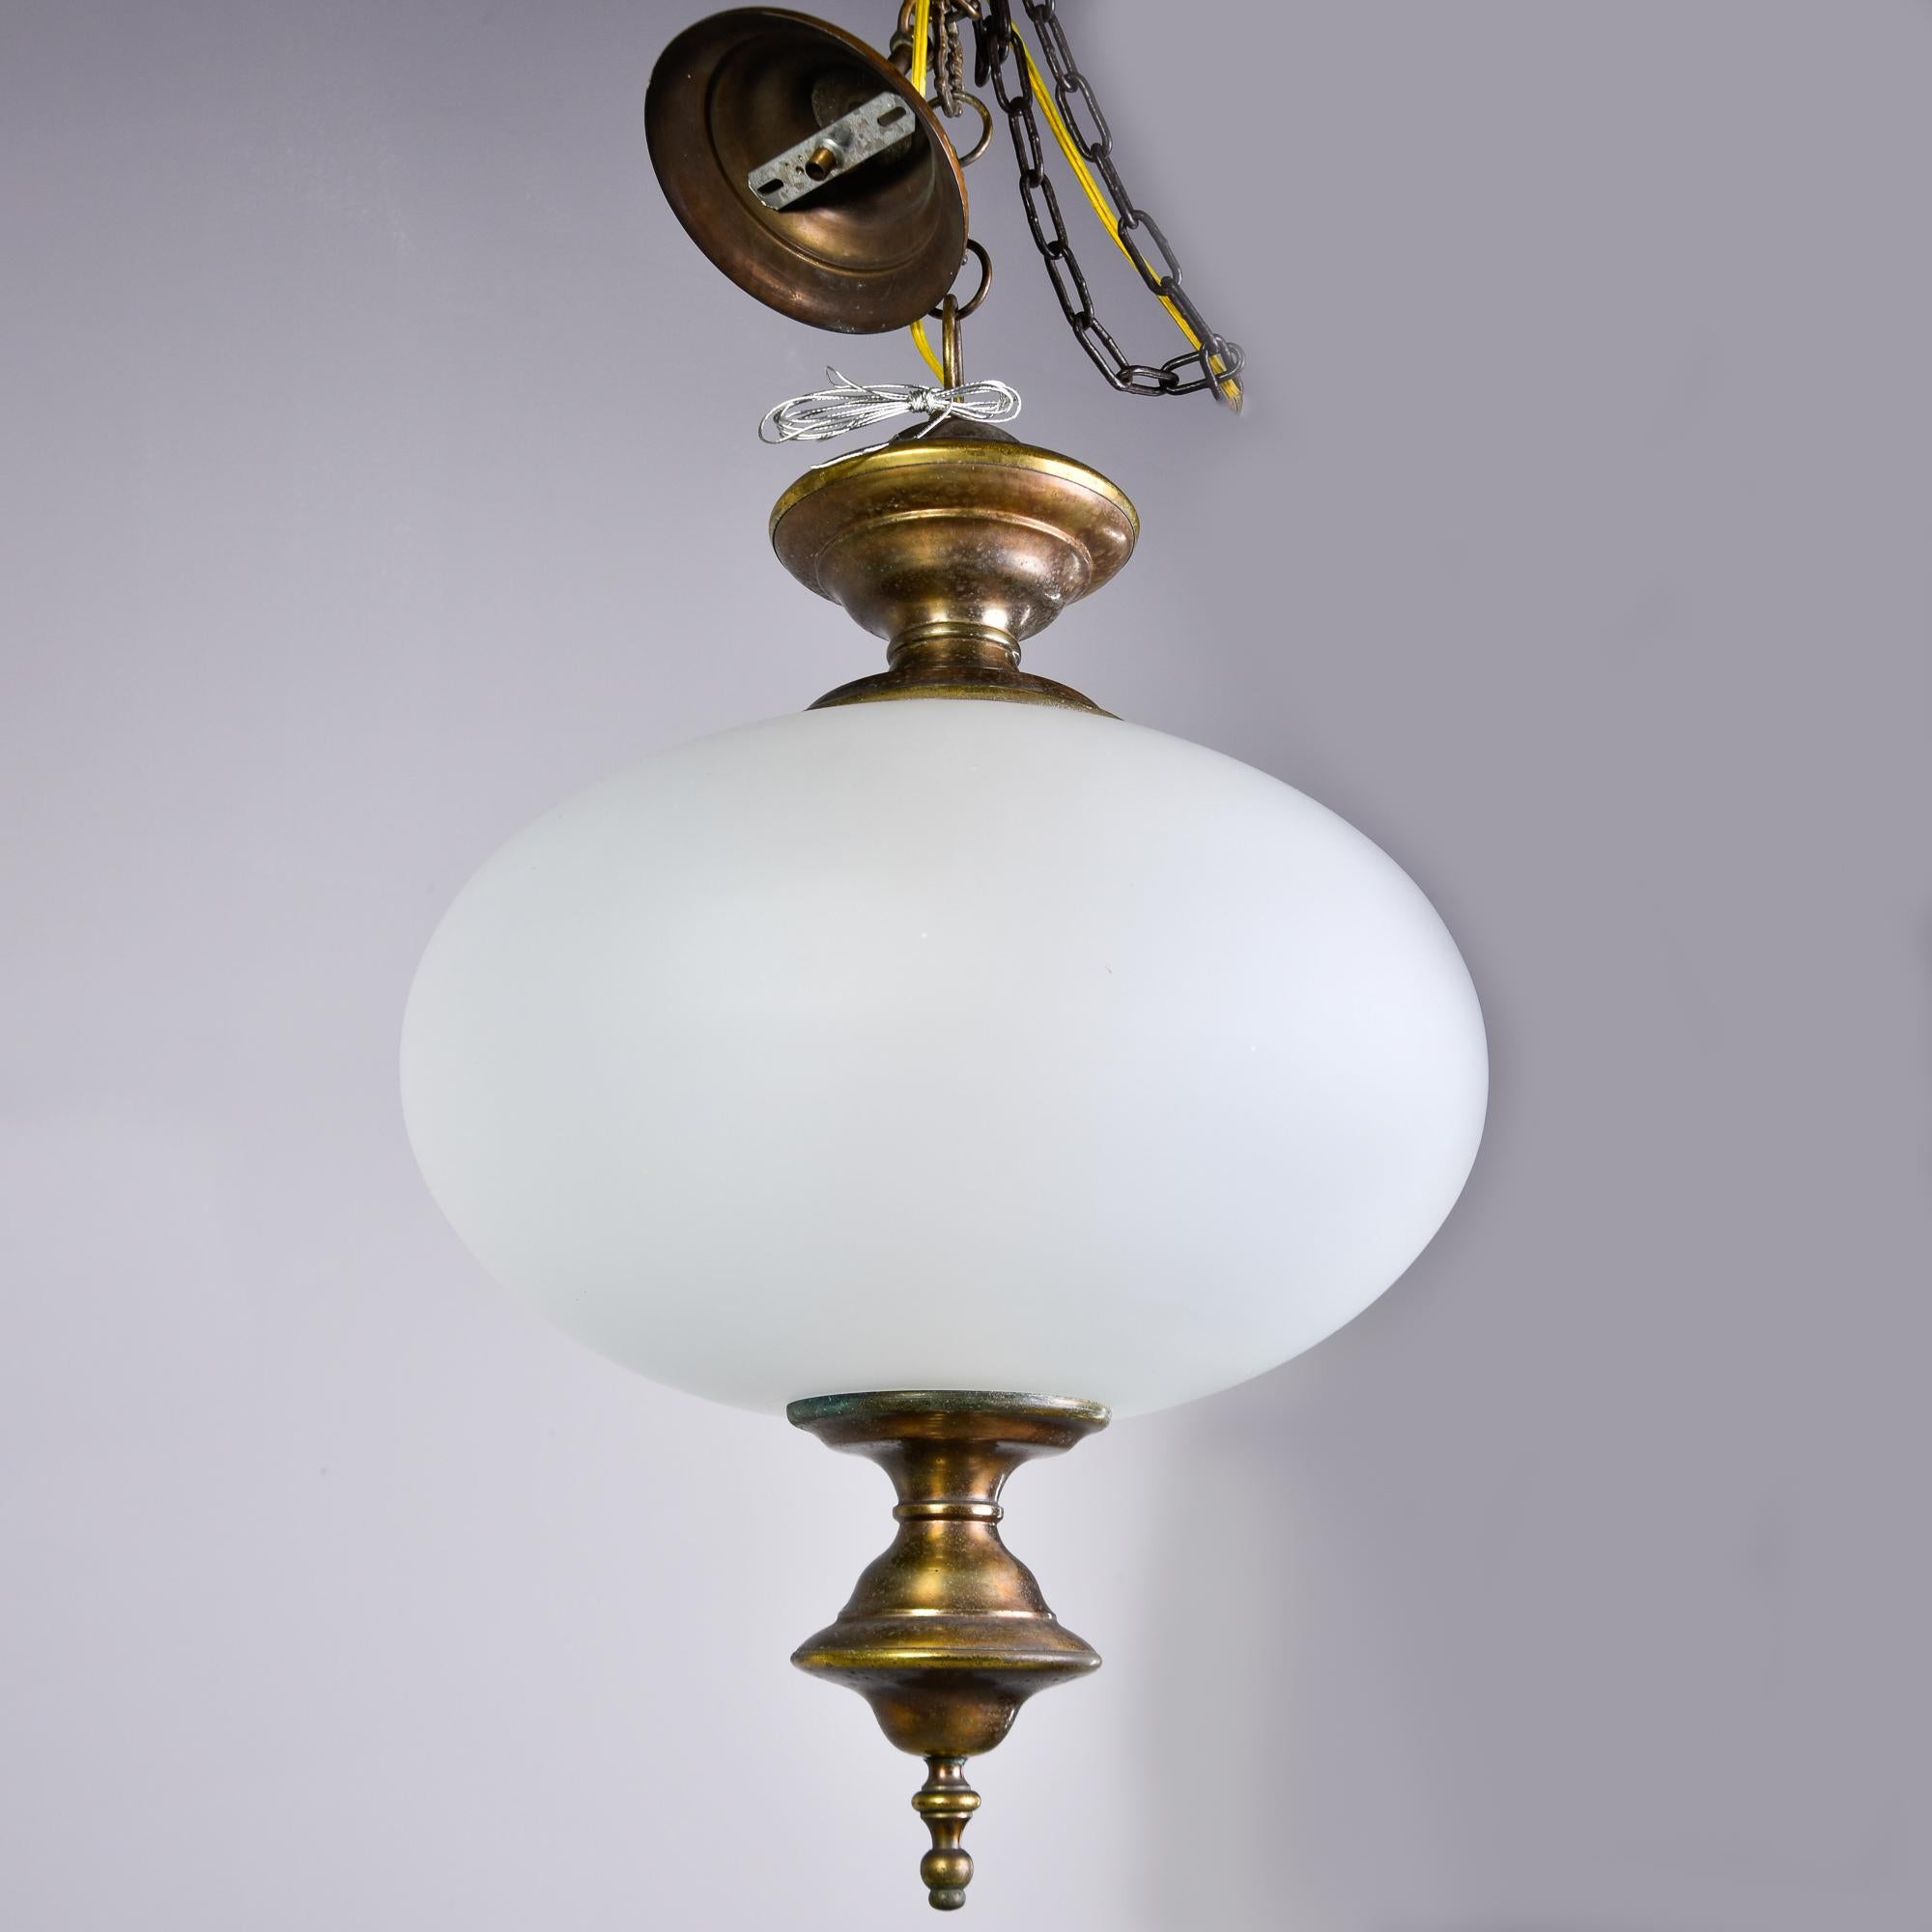 Found in Italy, this hanging pendant dates from approximately 1970. Squat, rounded white glass globe with bronze fittings. Three interior candelabra sockets. Unknown maker. New wiring for US electrical standards. No flaws found.